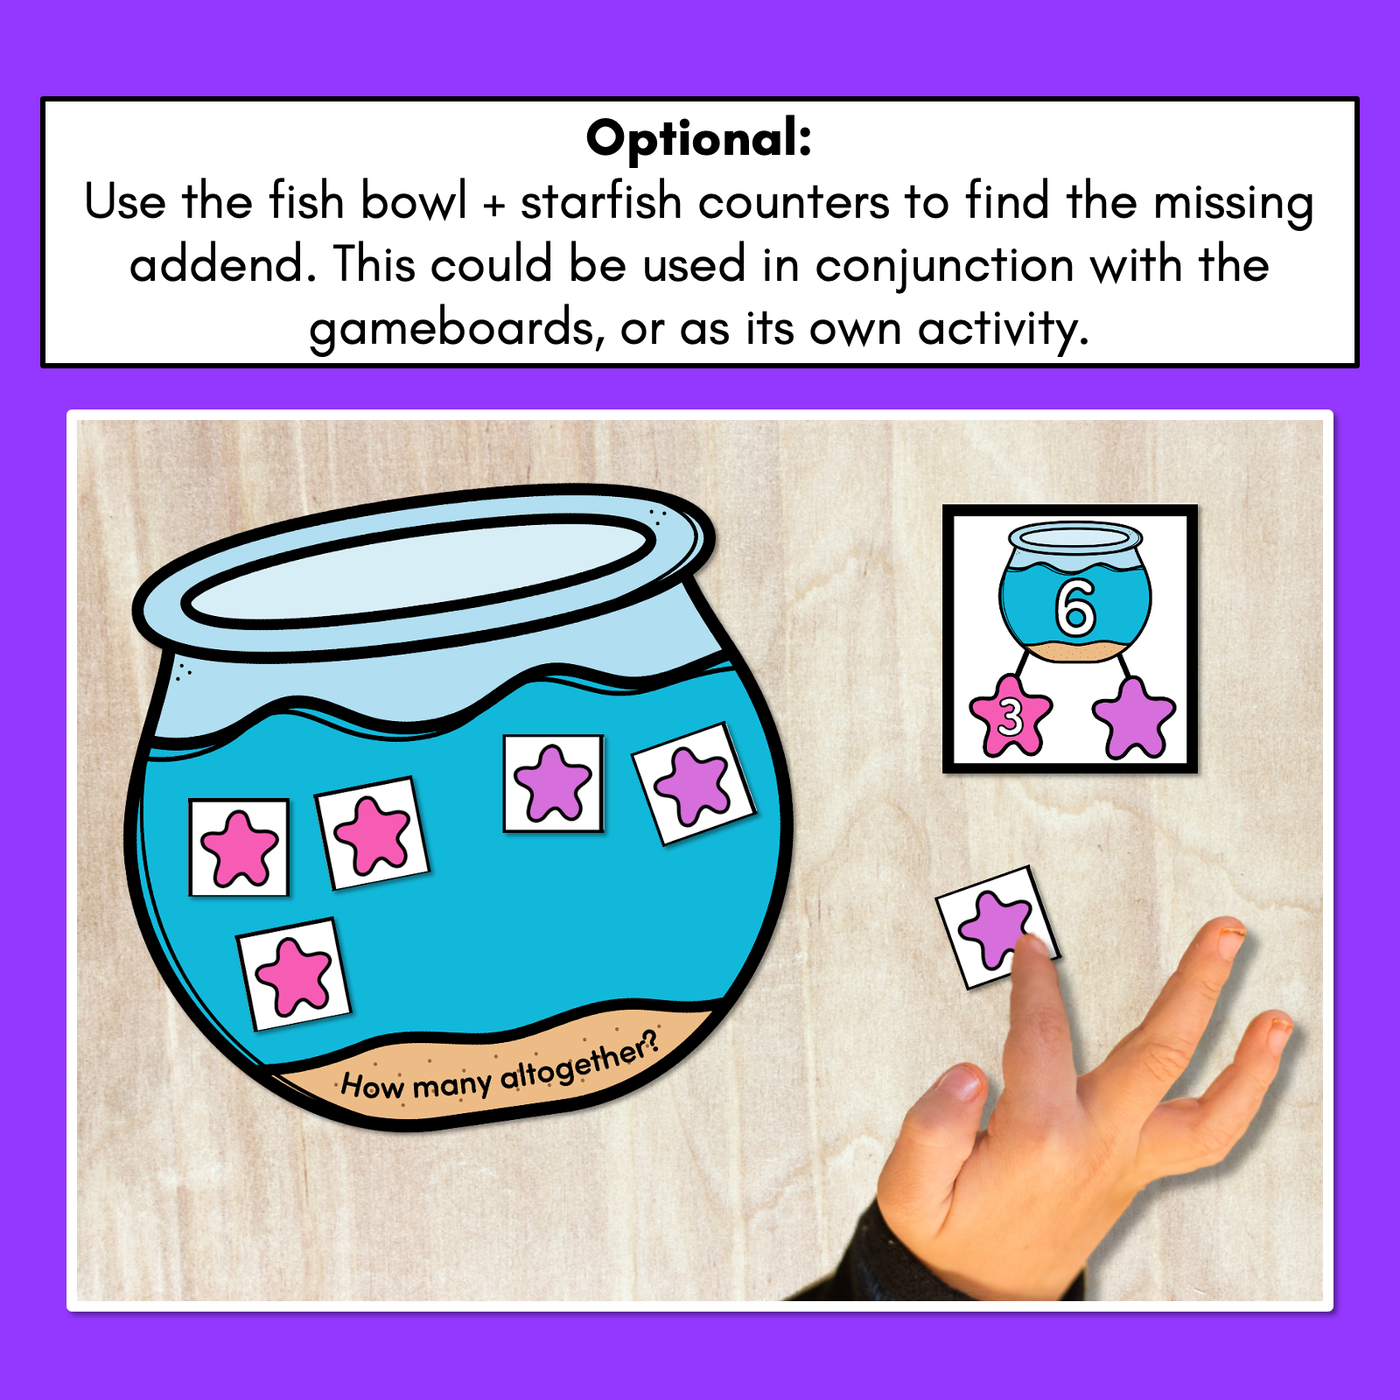 Missing Addends to 20 - Differentiated Ocean-Theme Maths Game for Kindergarten